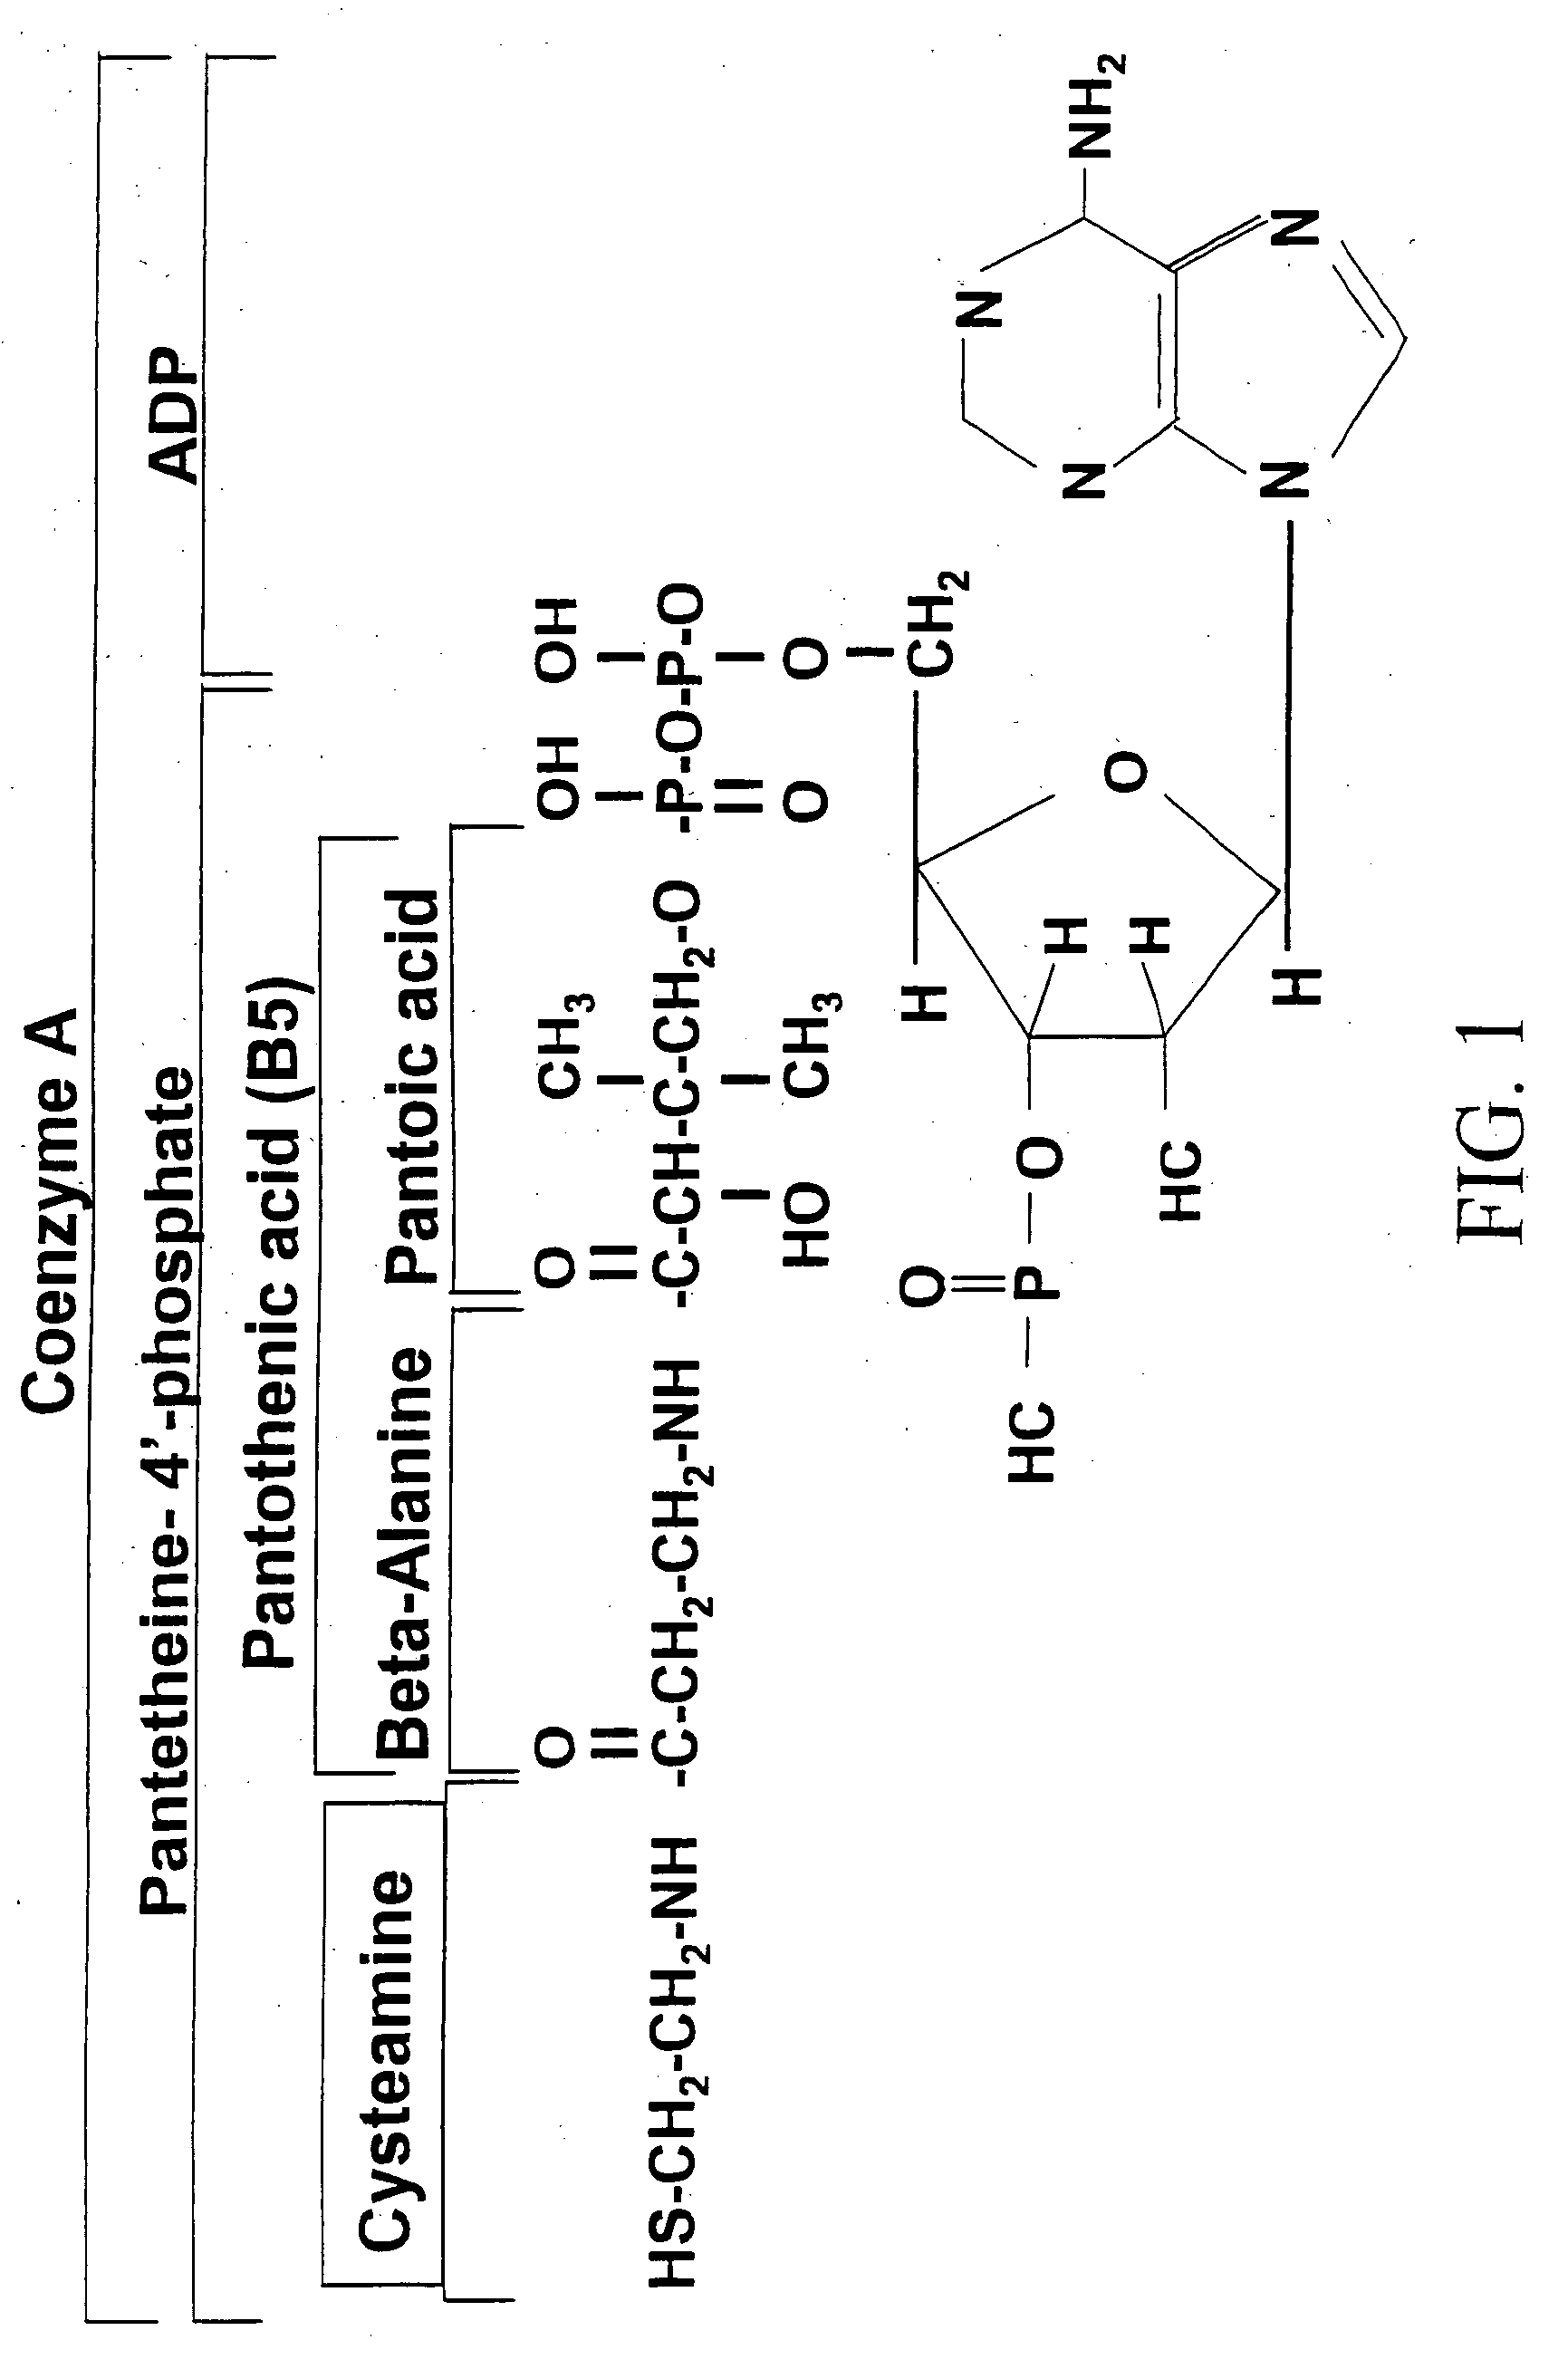 Materials and methods for modulating metabolism